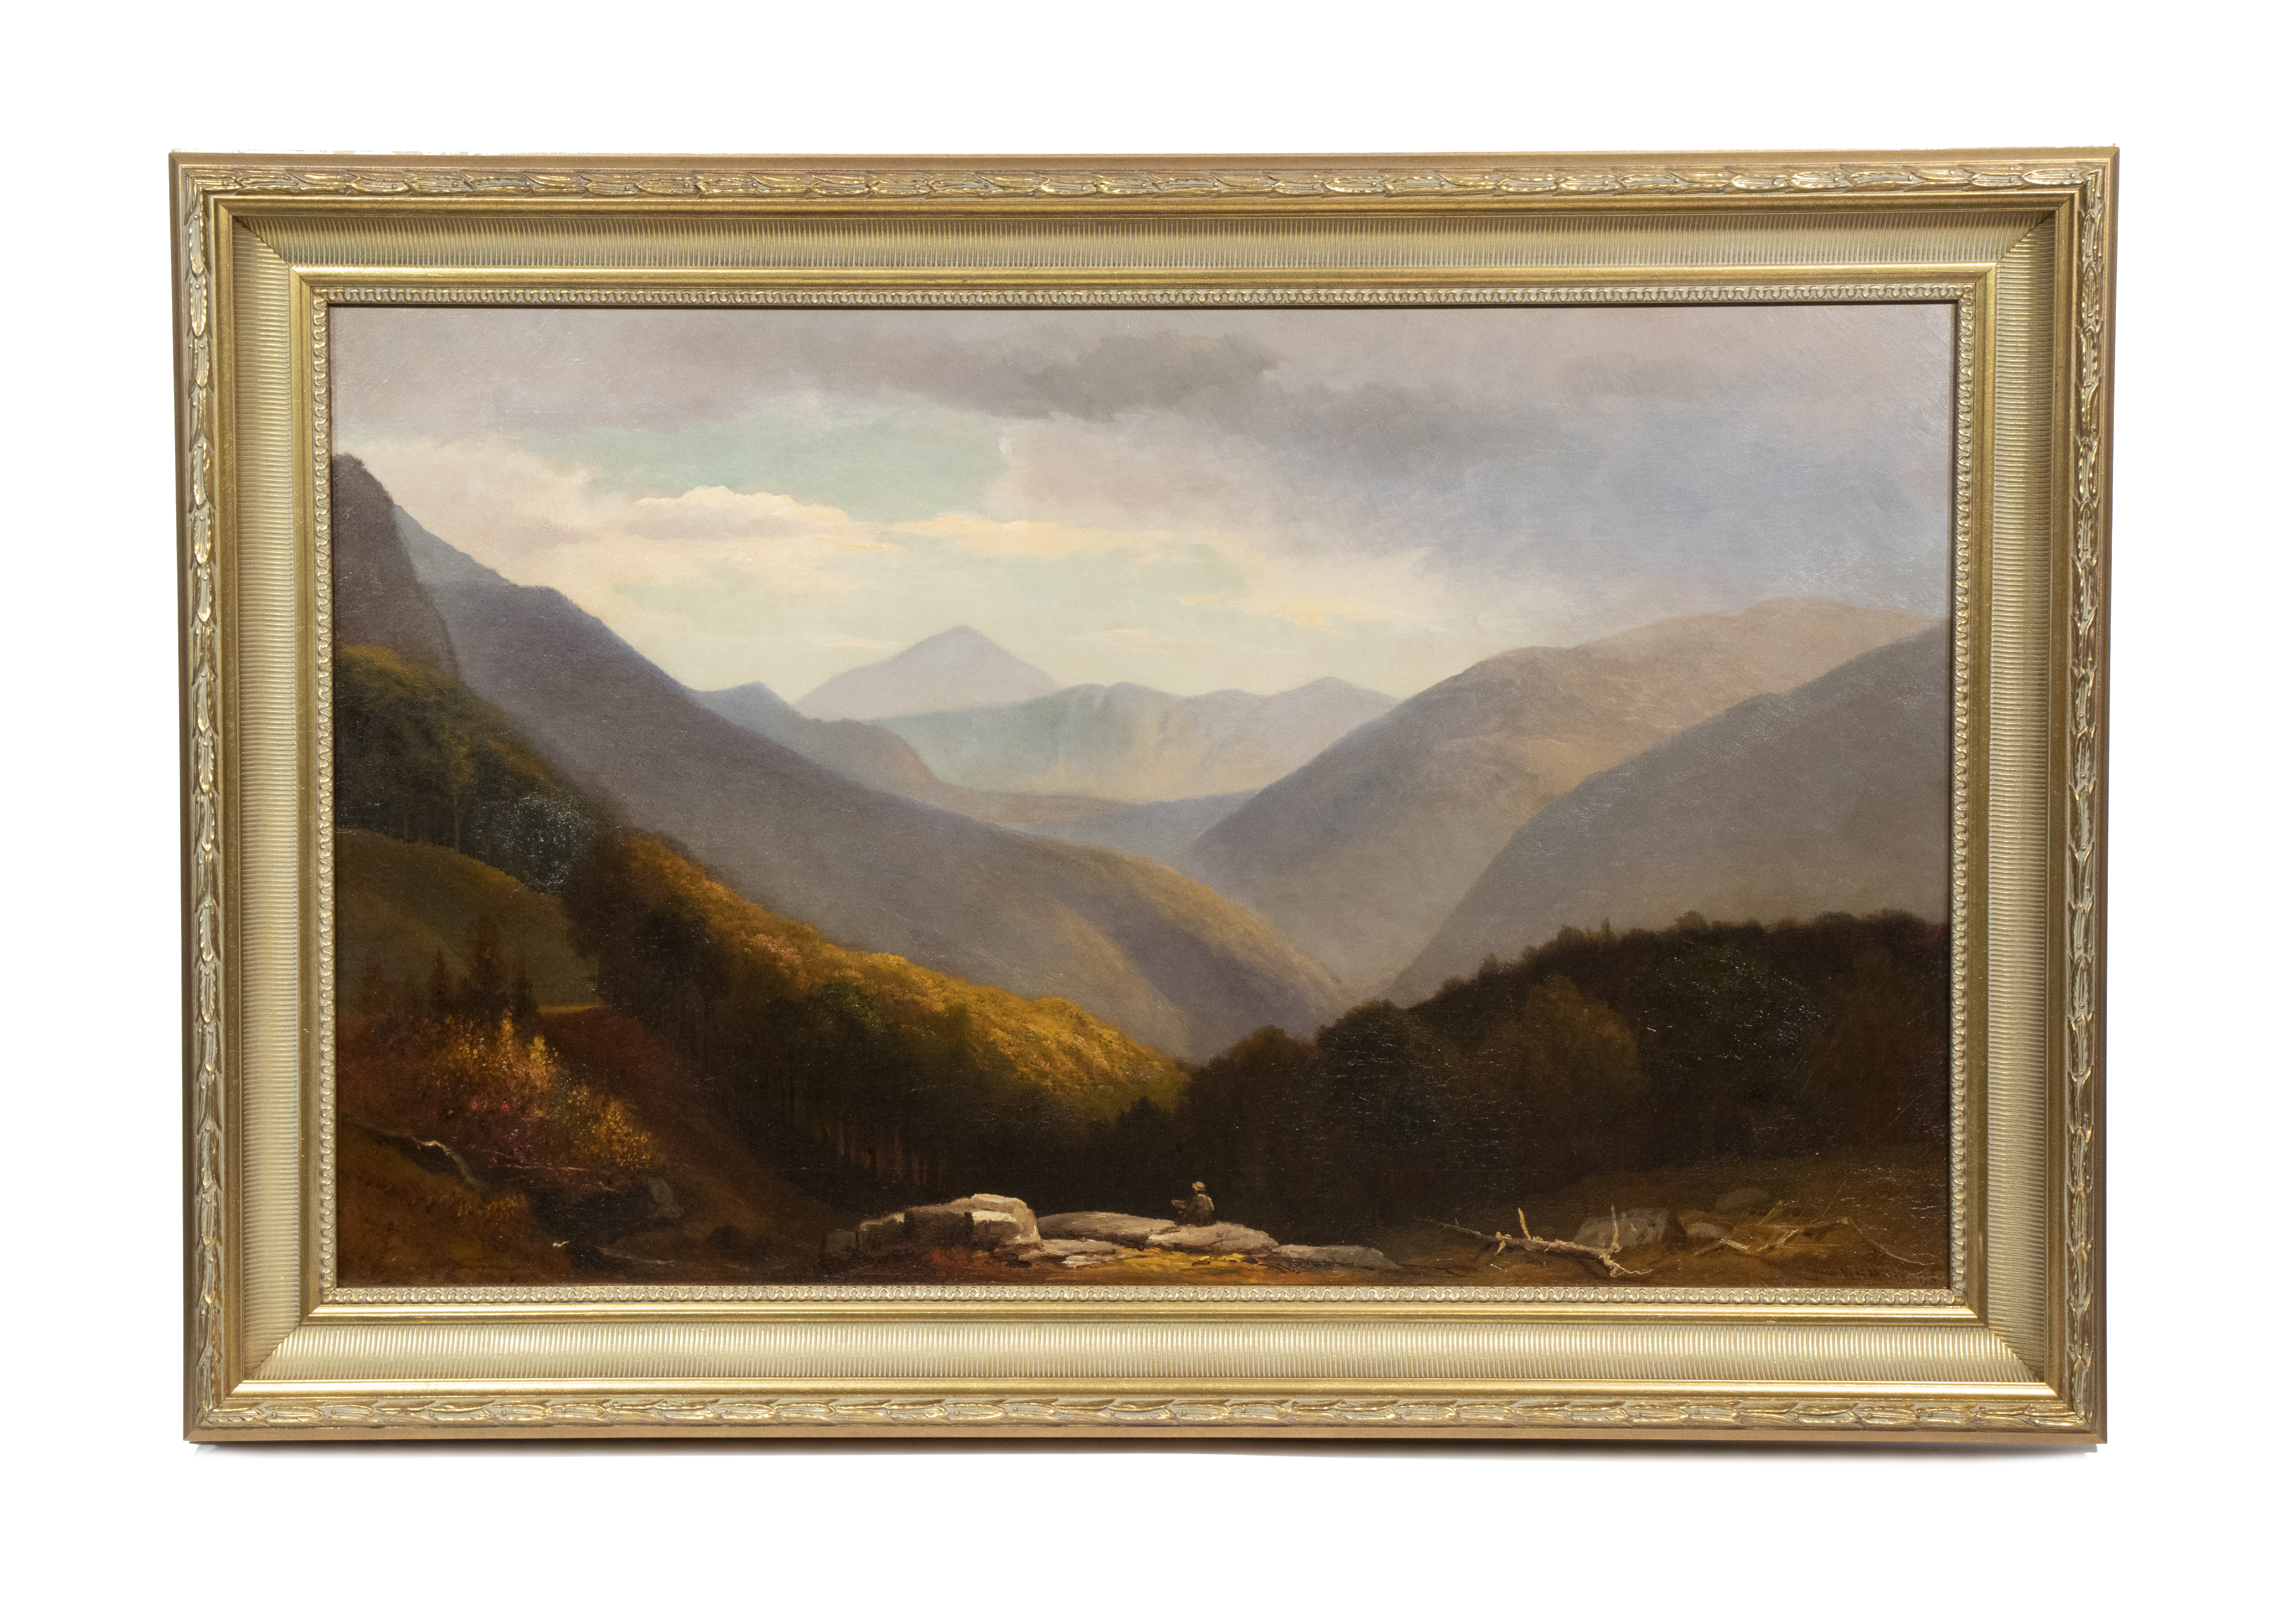 W H MILLS LATE 19TH C NEW HAMPSHIRE  2b4441